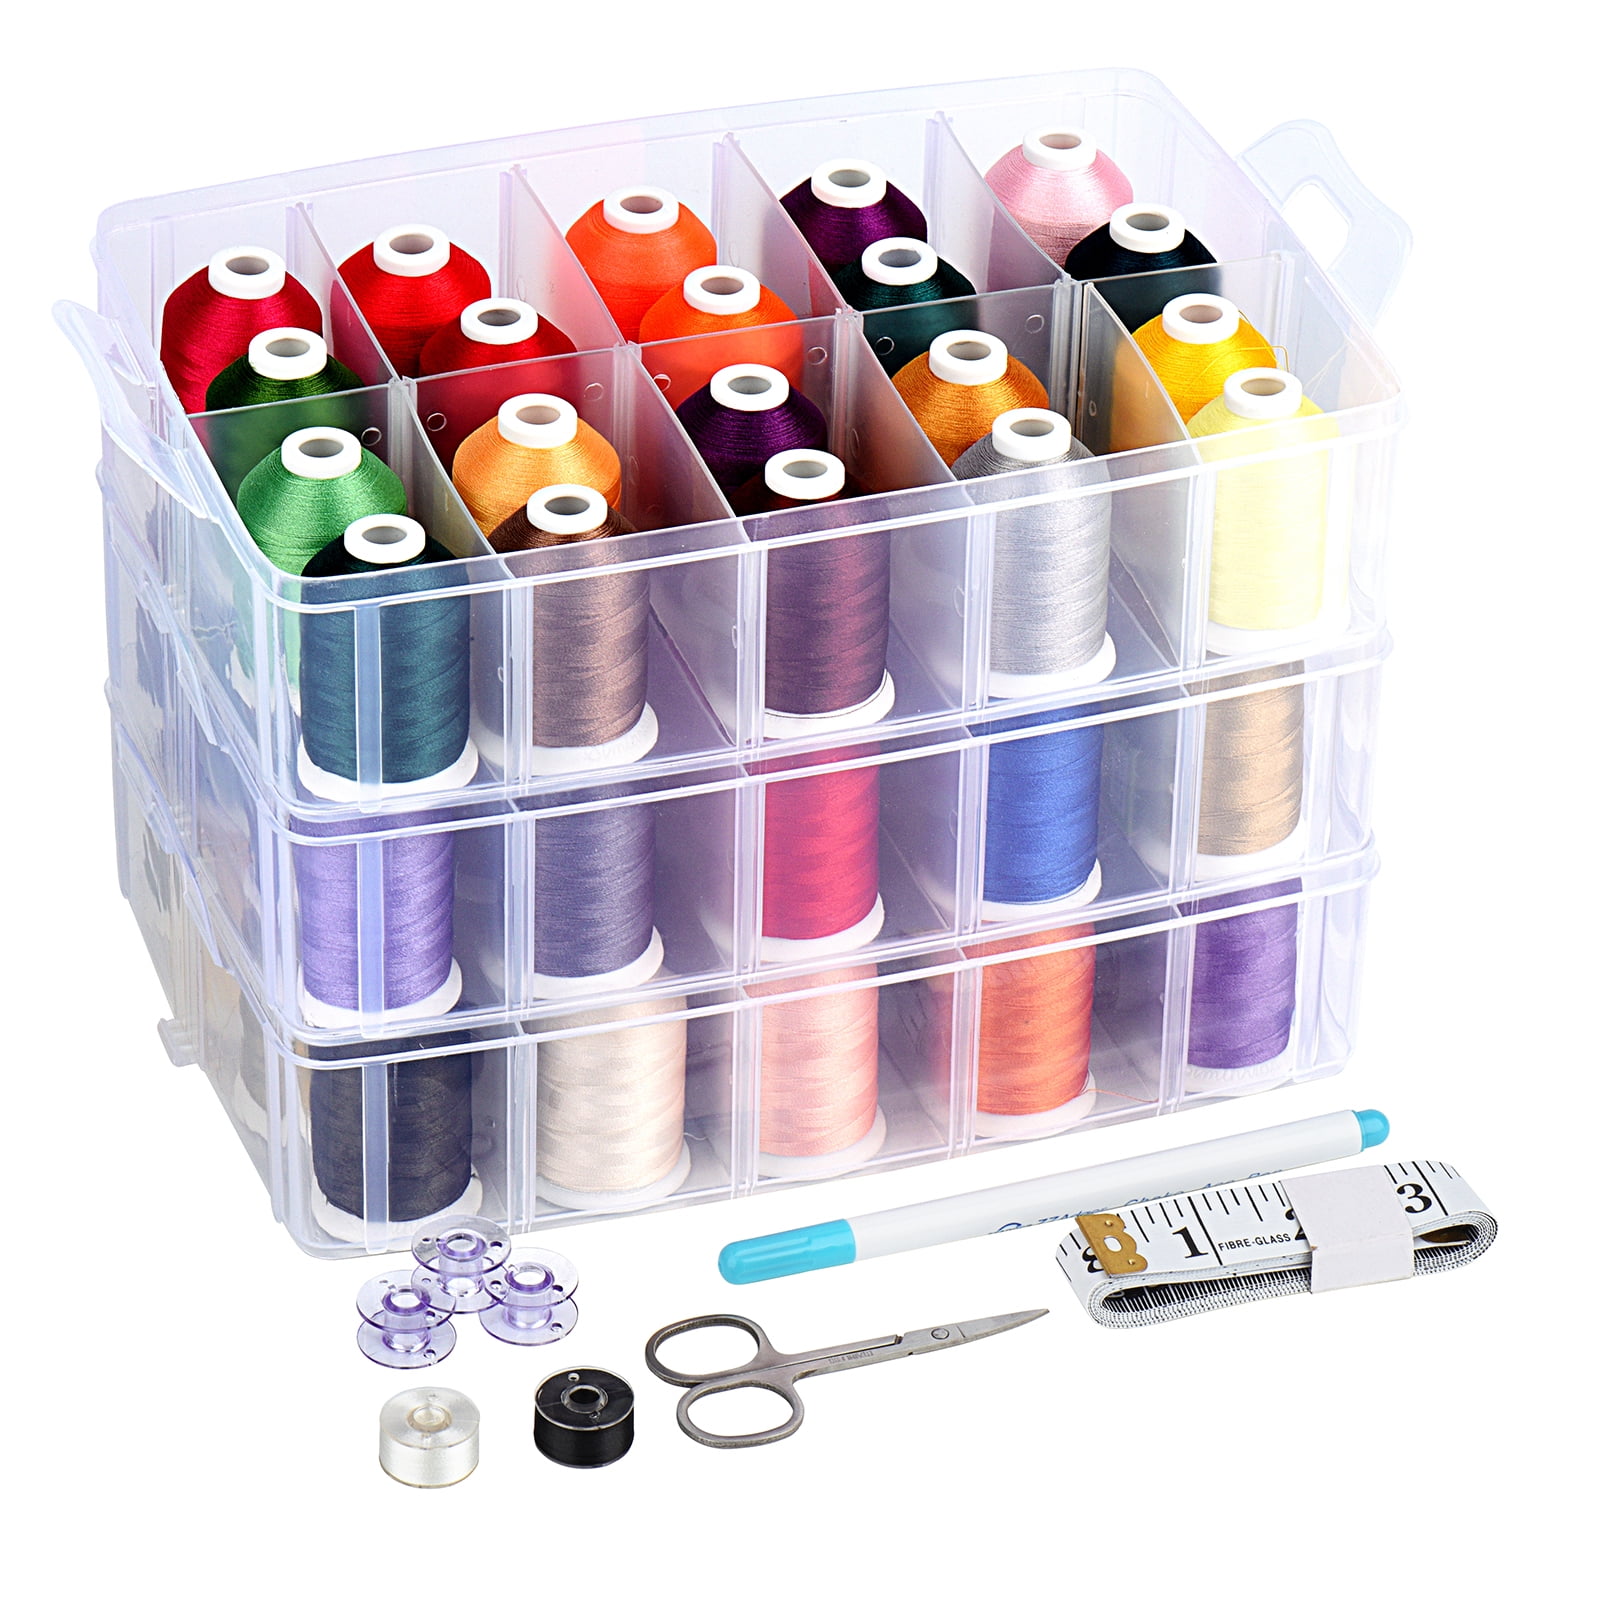 Simthread Embroidery Thread kit with Storage Box Basic Colors 500M (550Y)  Each Spool 38 Colors